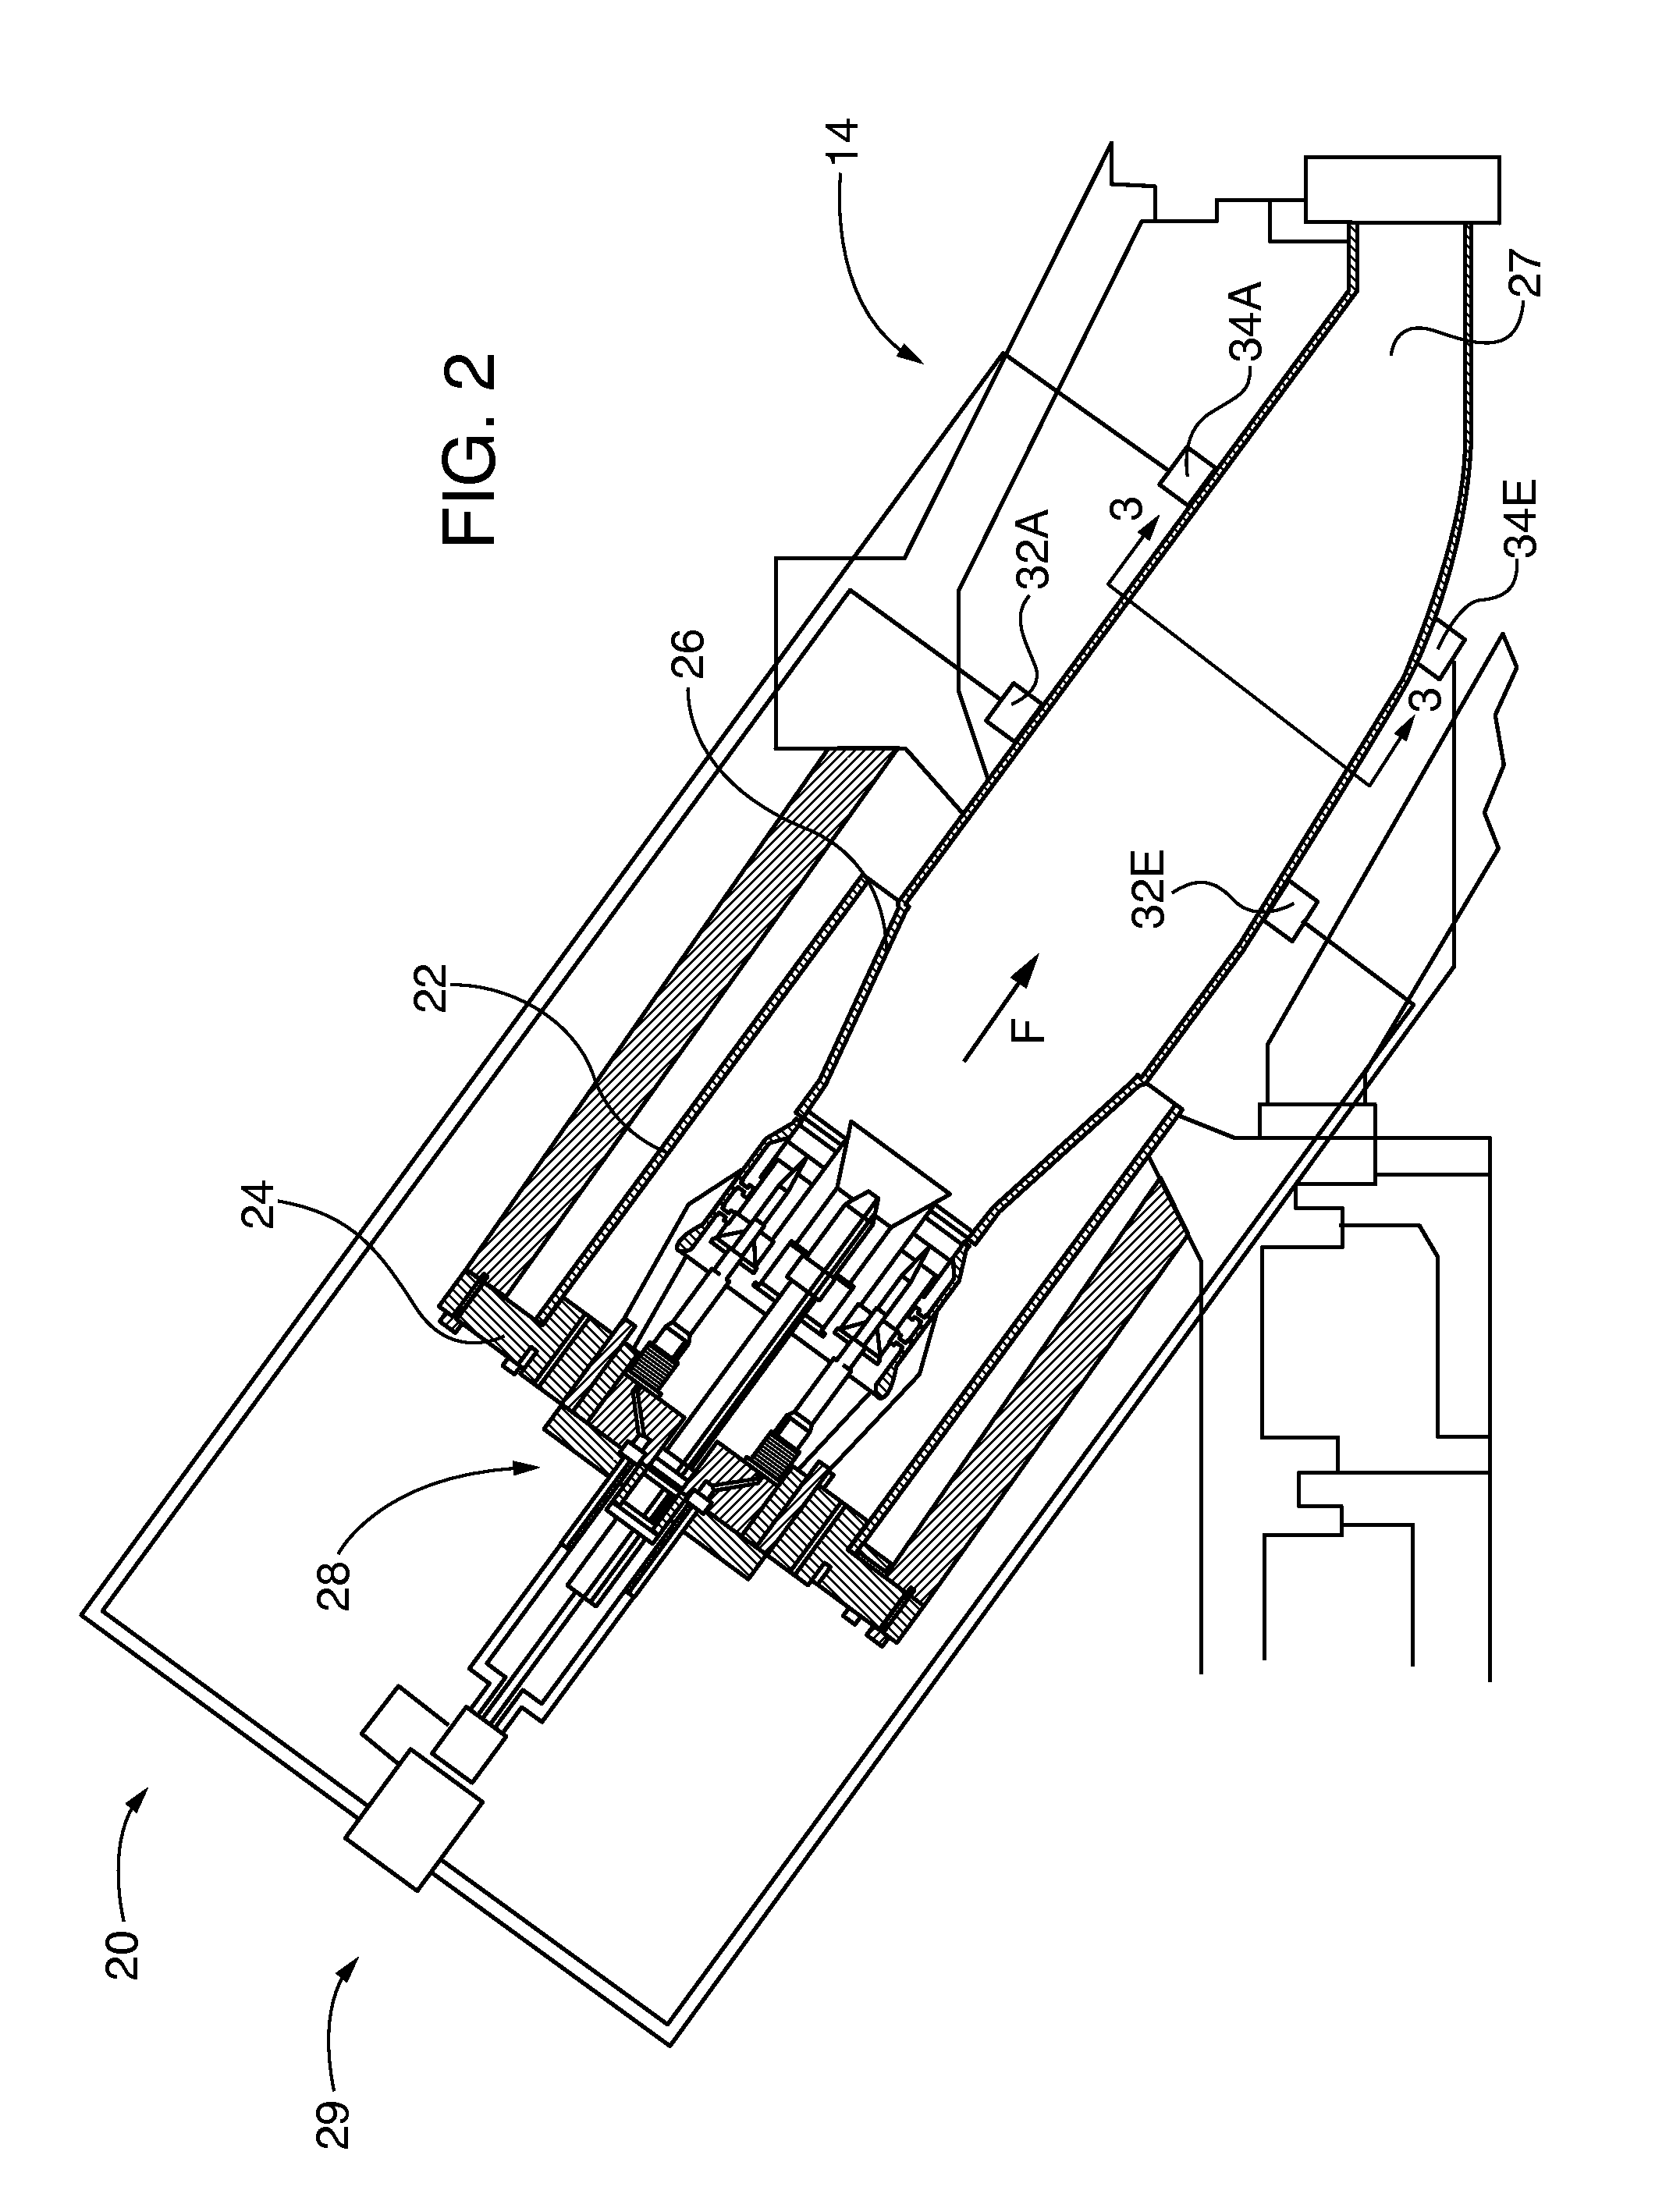 Active measurement of gas flow velocity or simultaneous measurement of velocity and temperature, including in gas turbine combustors